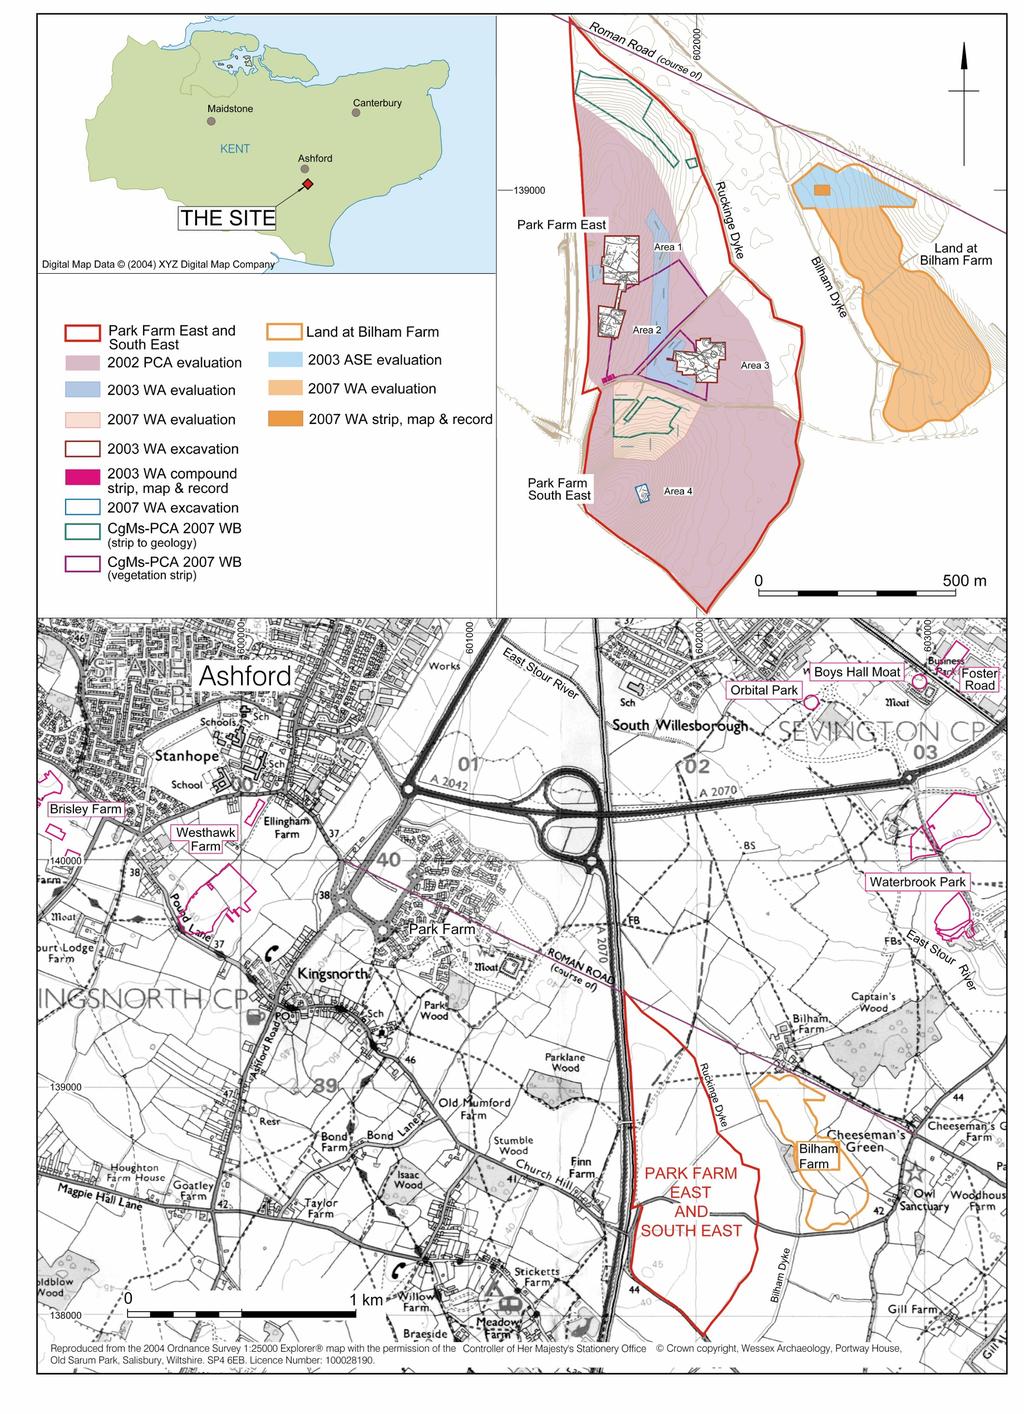 Figure 1: Location and topography of the site with main areas of